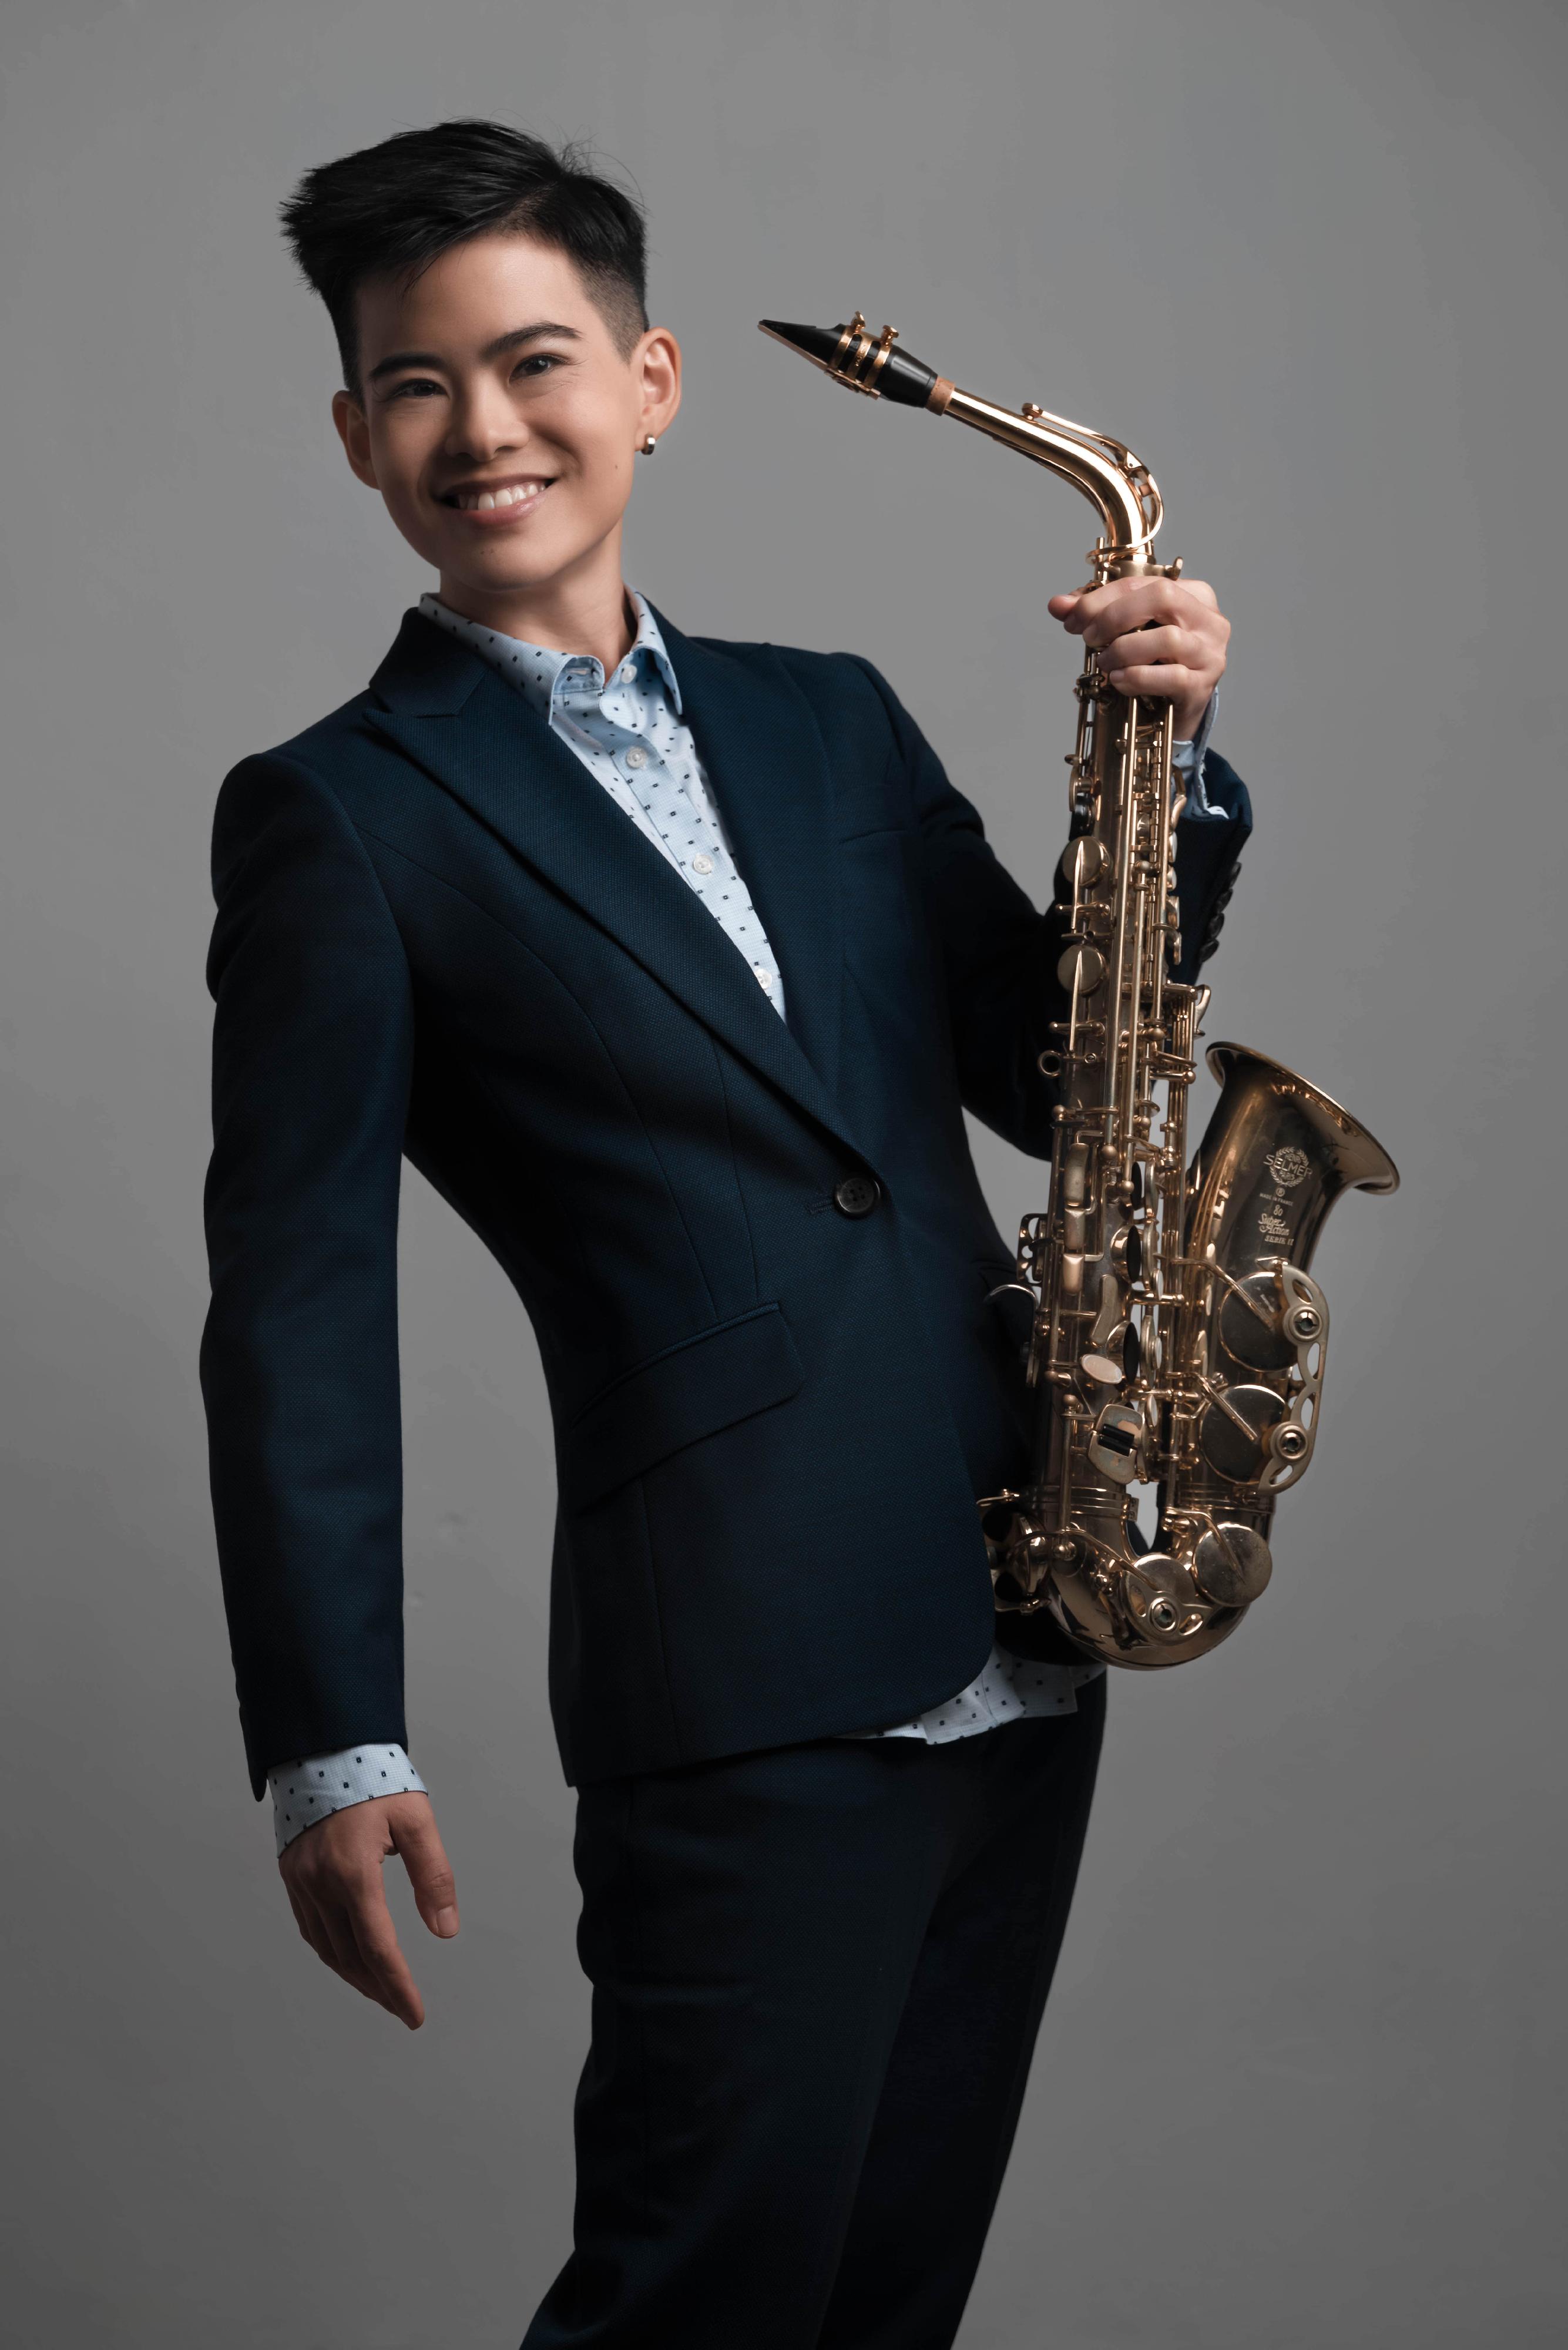 The Leisure and Cultural Services Department's "Our Music Talents" Series will present a saxophone recital by saxophonist Chemie Ching, together with pianist Cherry Tsang and drummer Nate Wong, in November. Photo shows Ching.